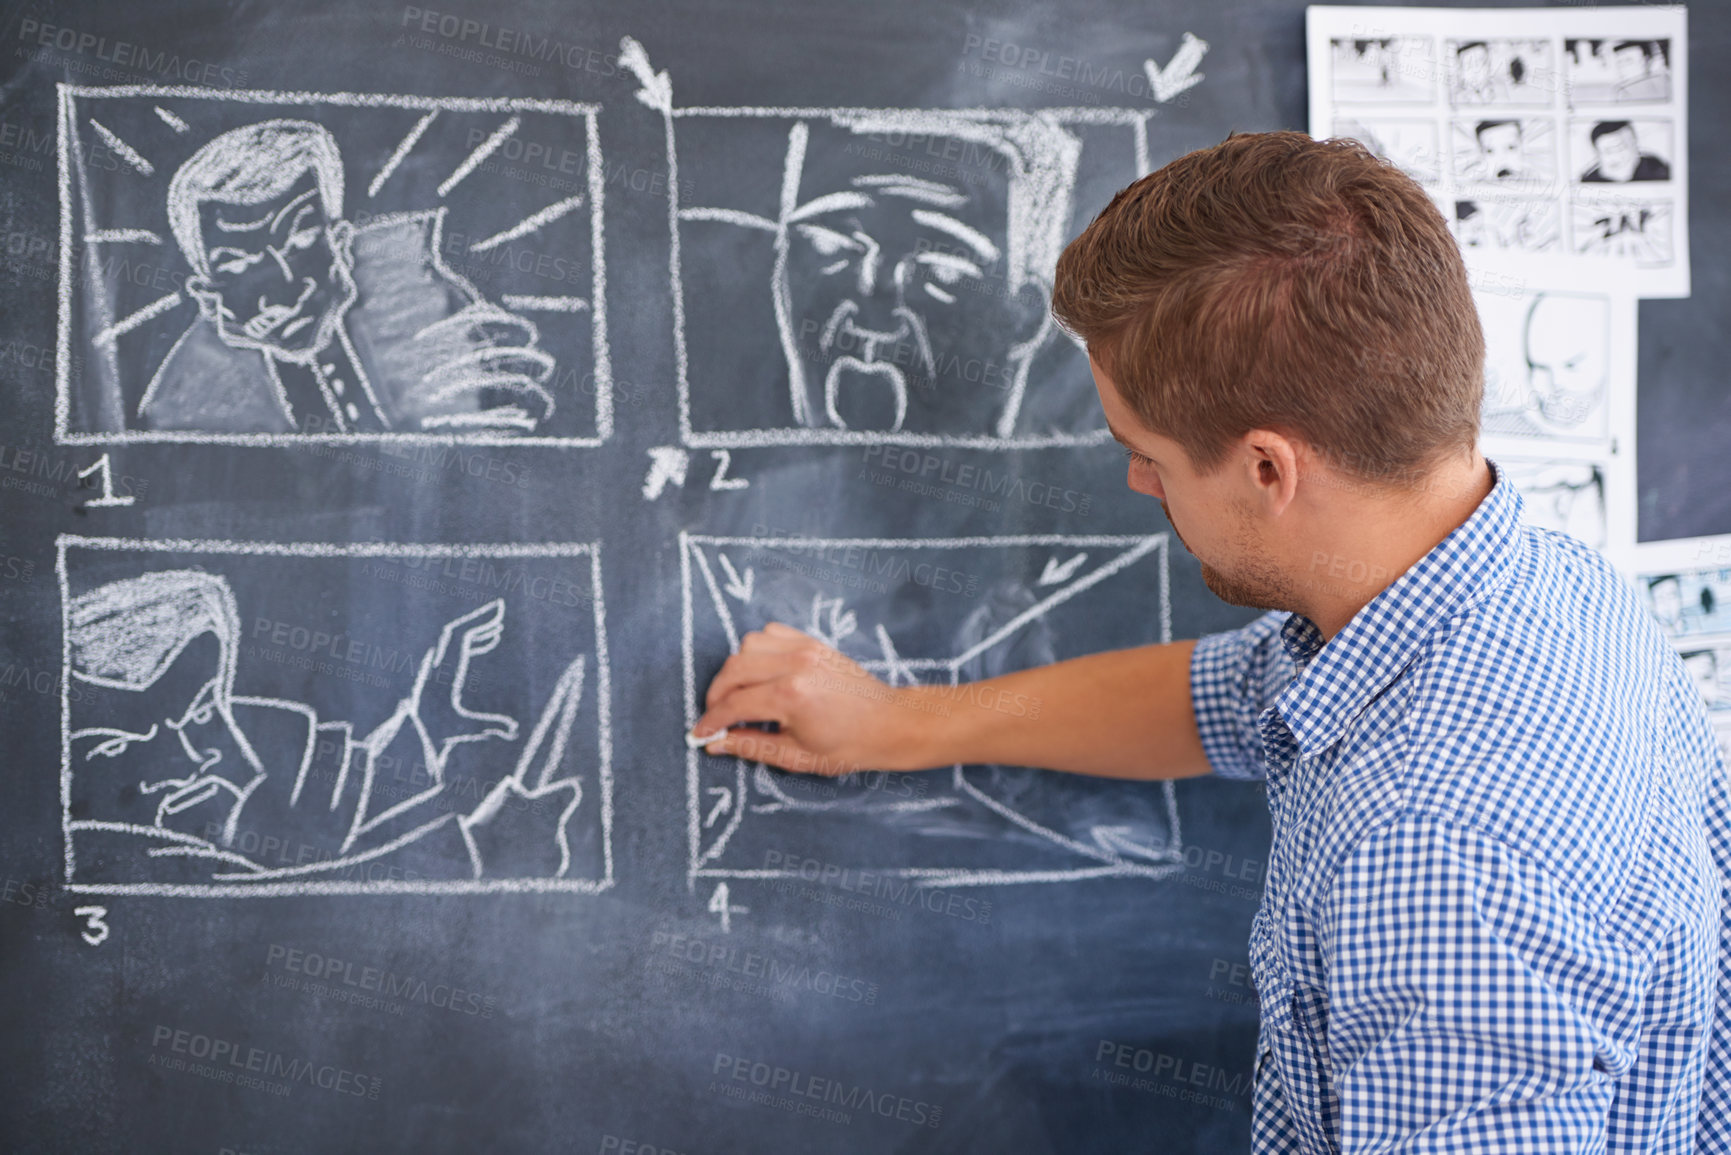 Buy stock photo A young man drawing up a storyboard on his office chalkboard